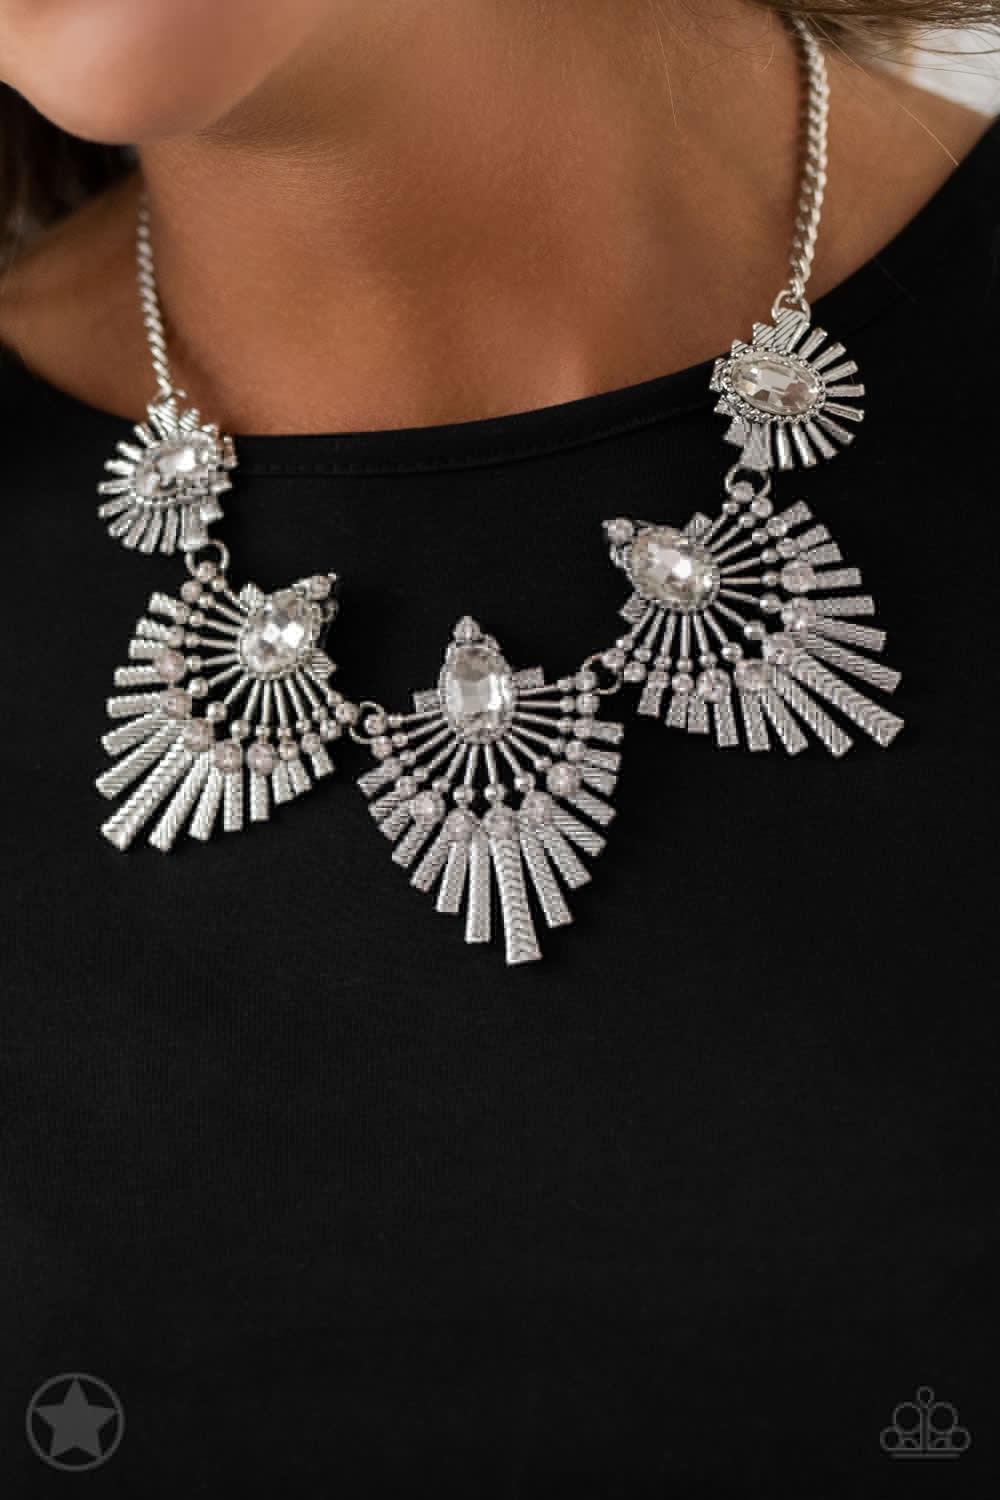 Paparazzi Accessories Miss YOU-niverse - Silver Textured metal bars flare out from a mesmerizing gem, creating a fringe of fanning frames. Sprinkled with matching white rhinestones, the dazzling display falls just below the collar for a sassy finish. Feat